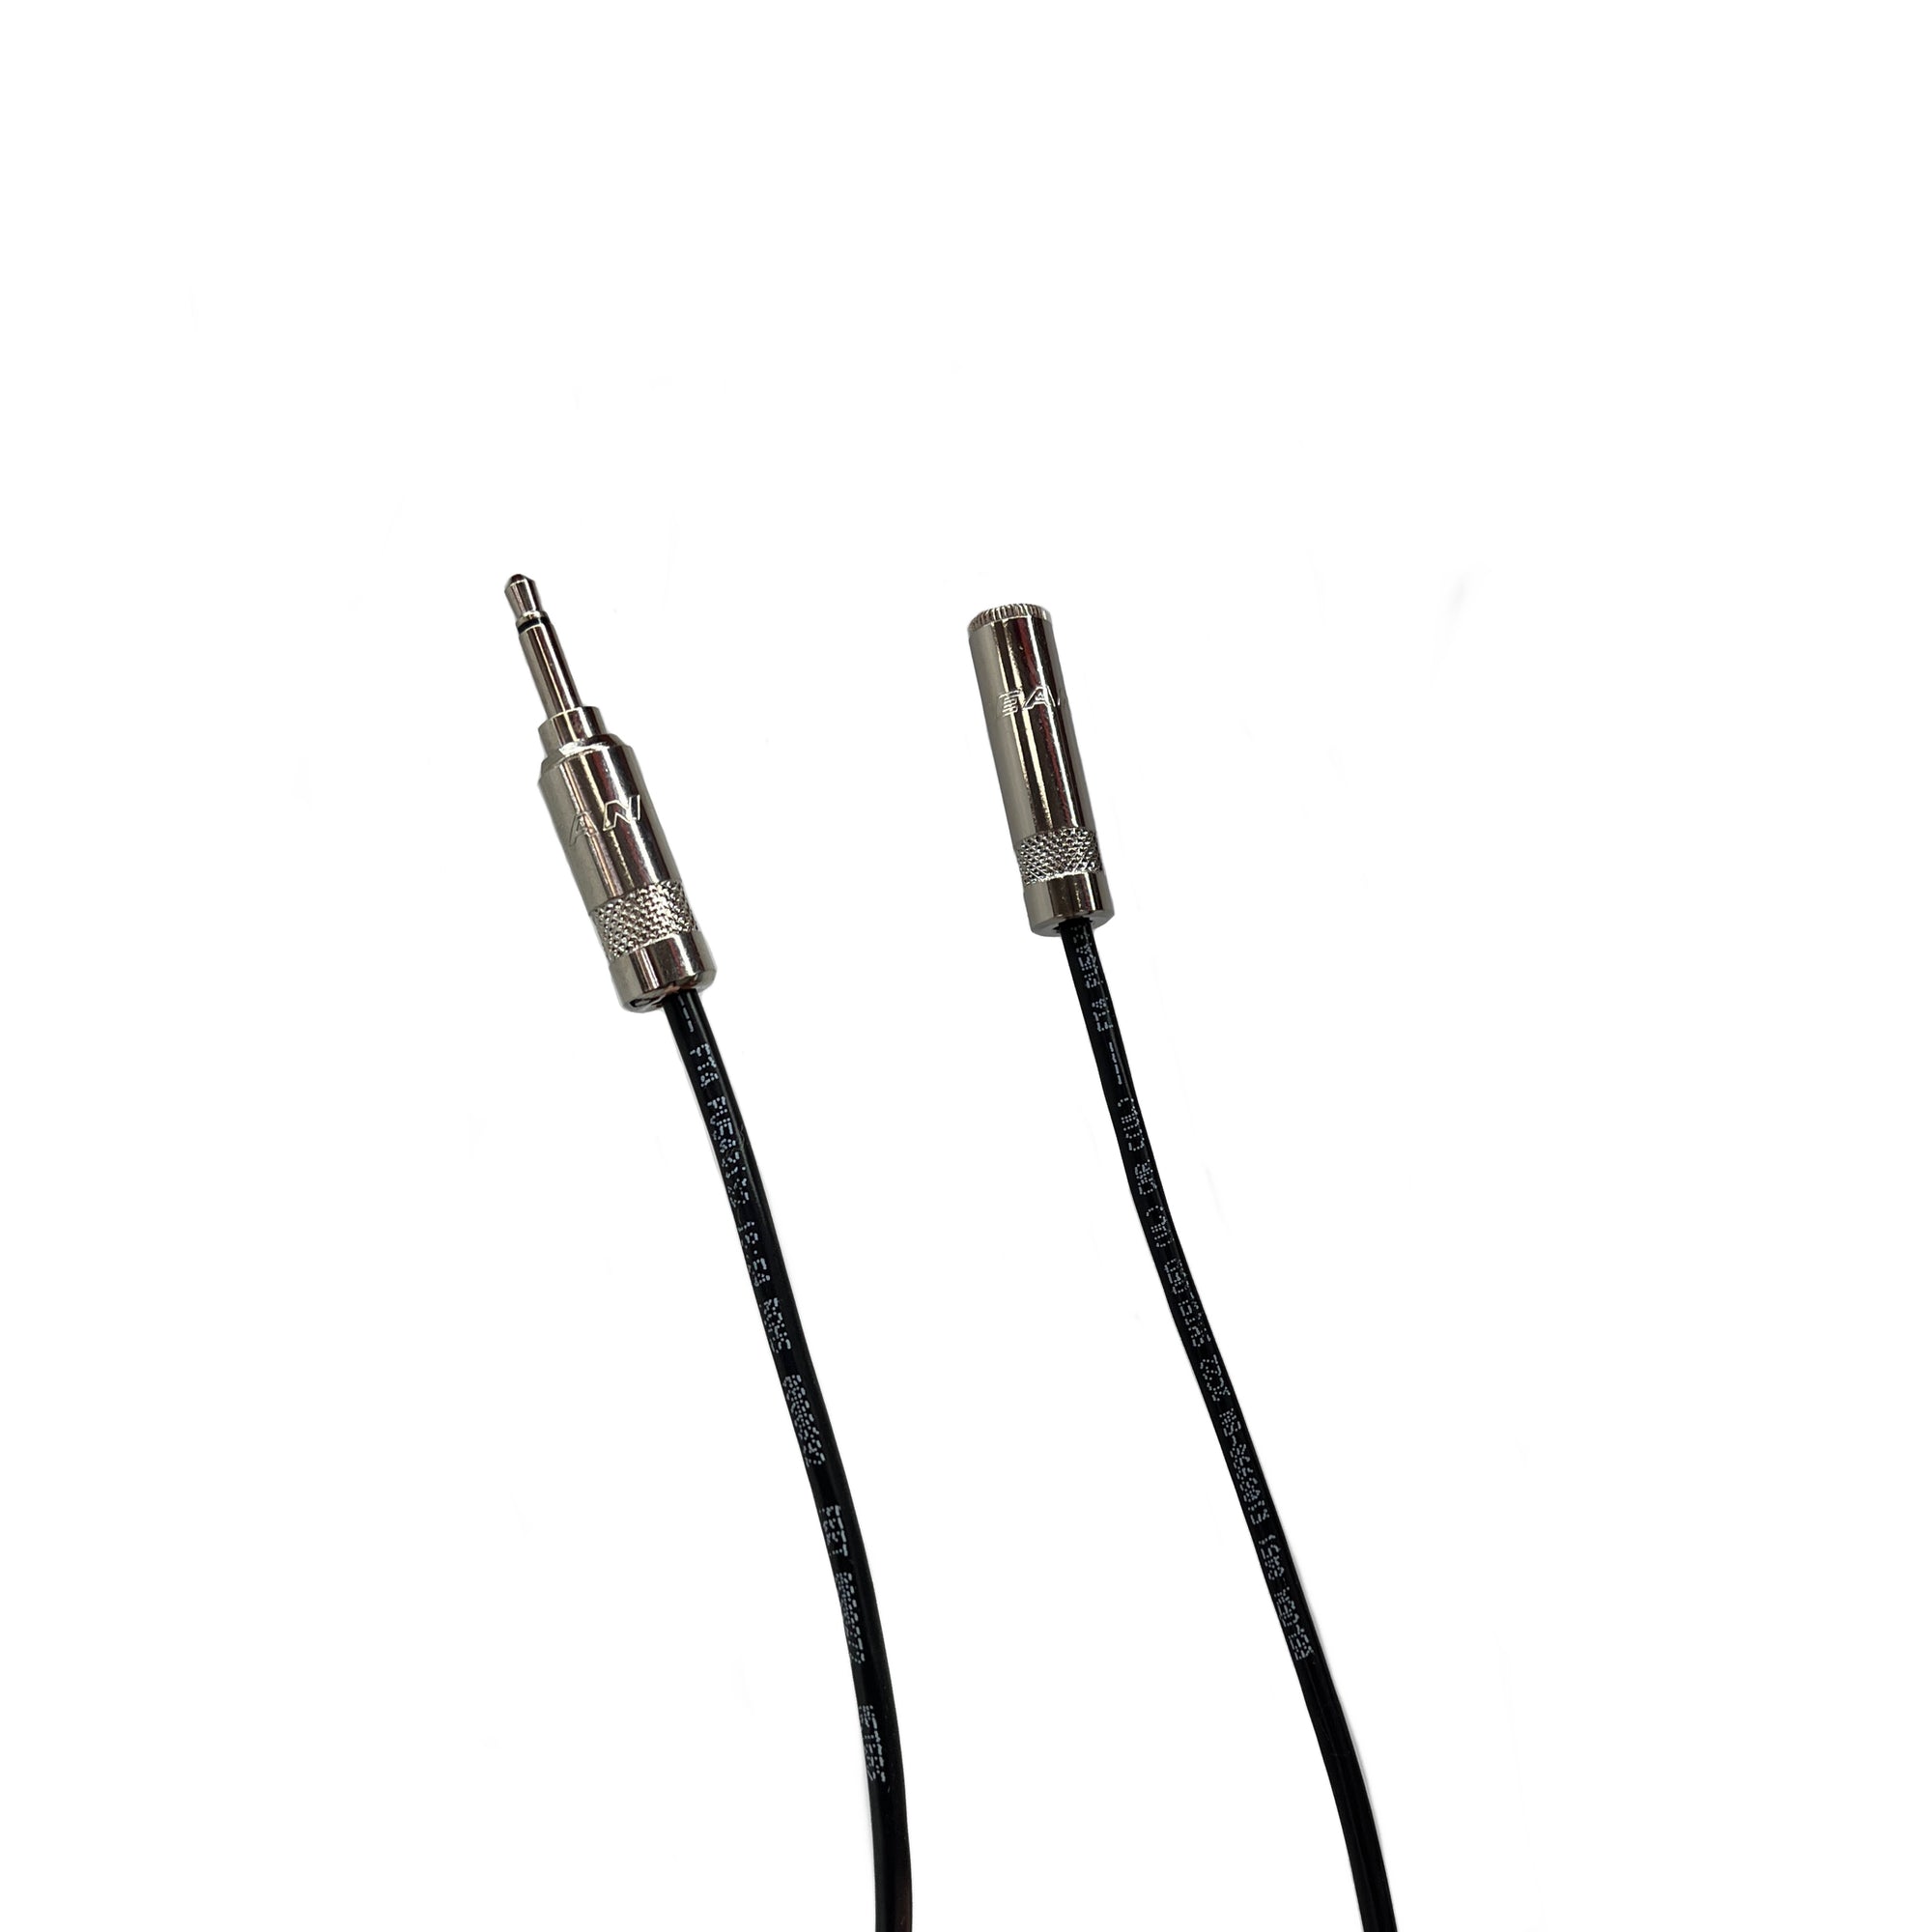 3.5mm Mono Male to Female Extension Cable PVC Installation Grade Jacket